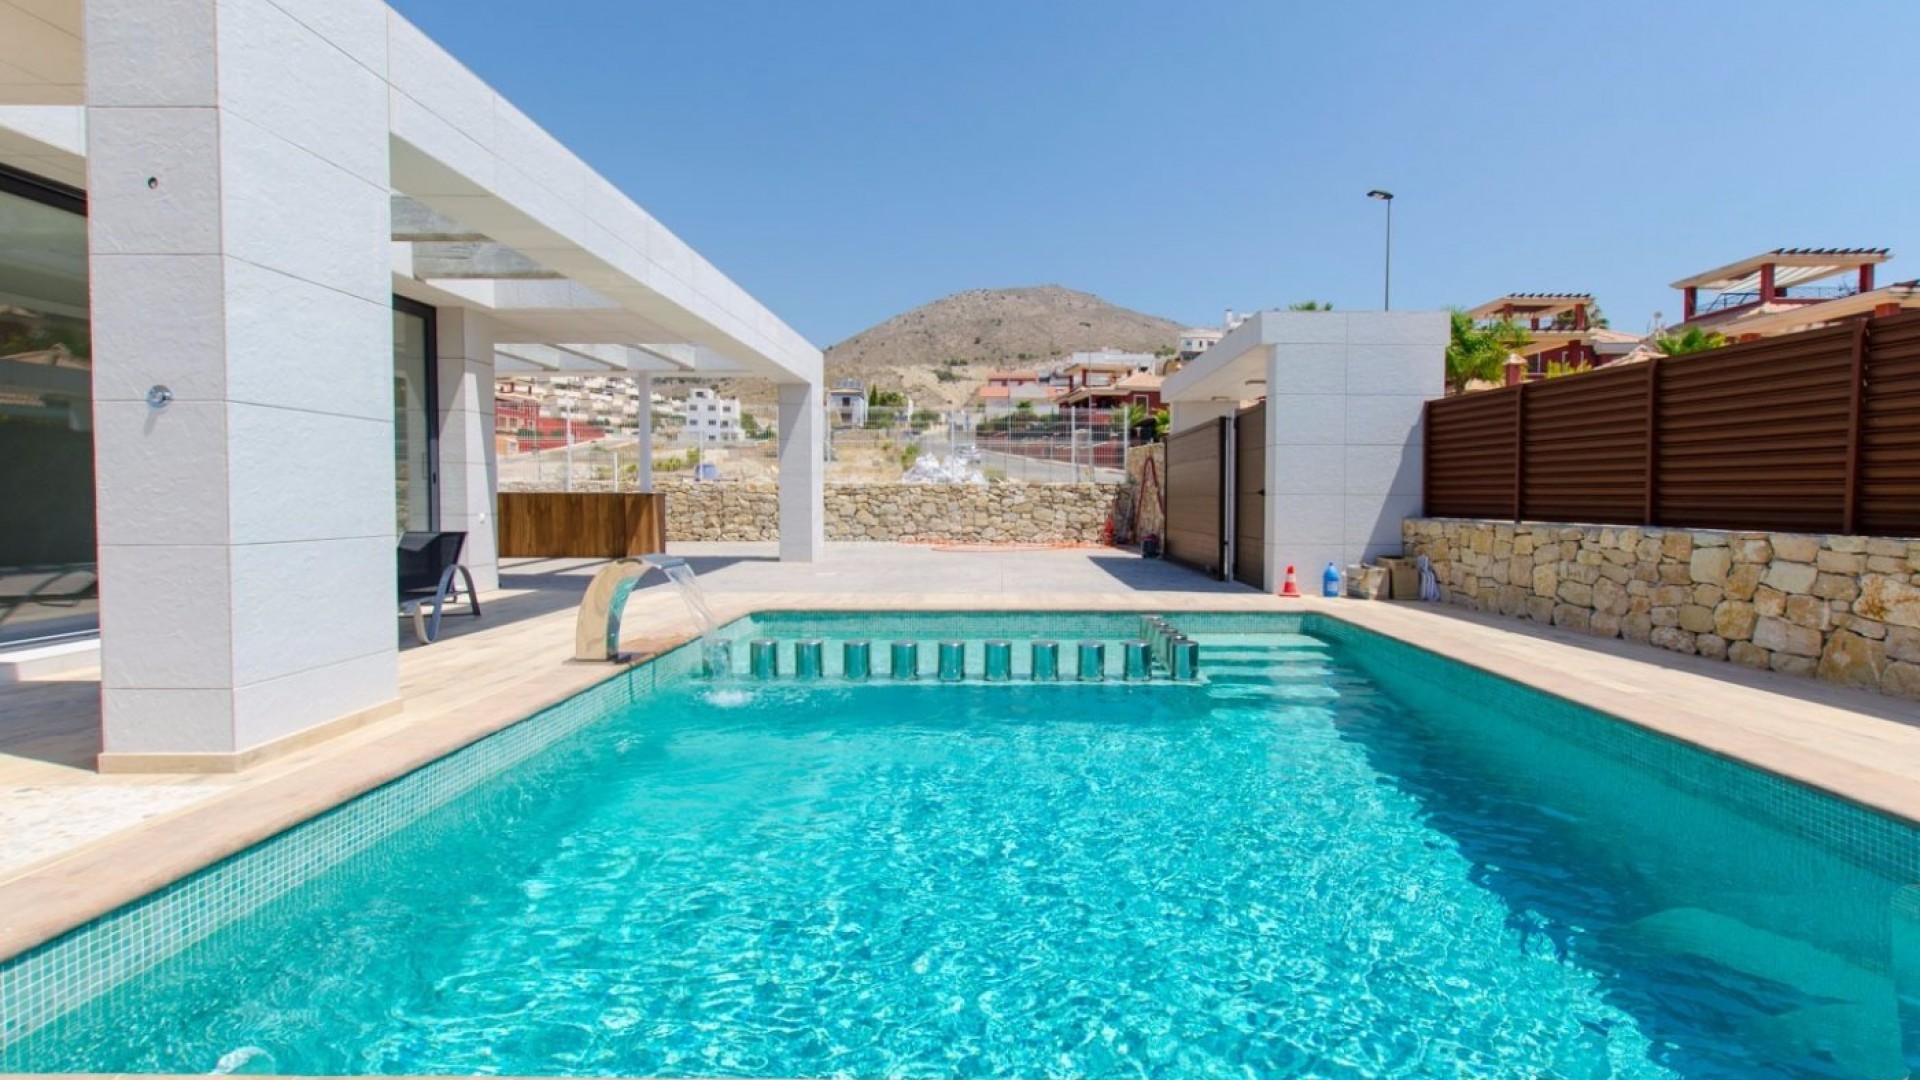 Large modern villa/house In Balcon de Finestrat, Benidorm, 4 bedrooms, 4 bathrooms, large plot with private pool, great distant sea views